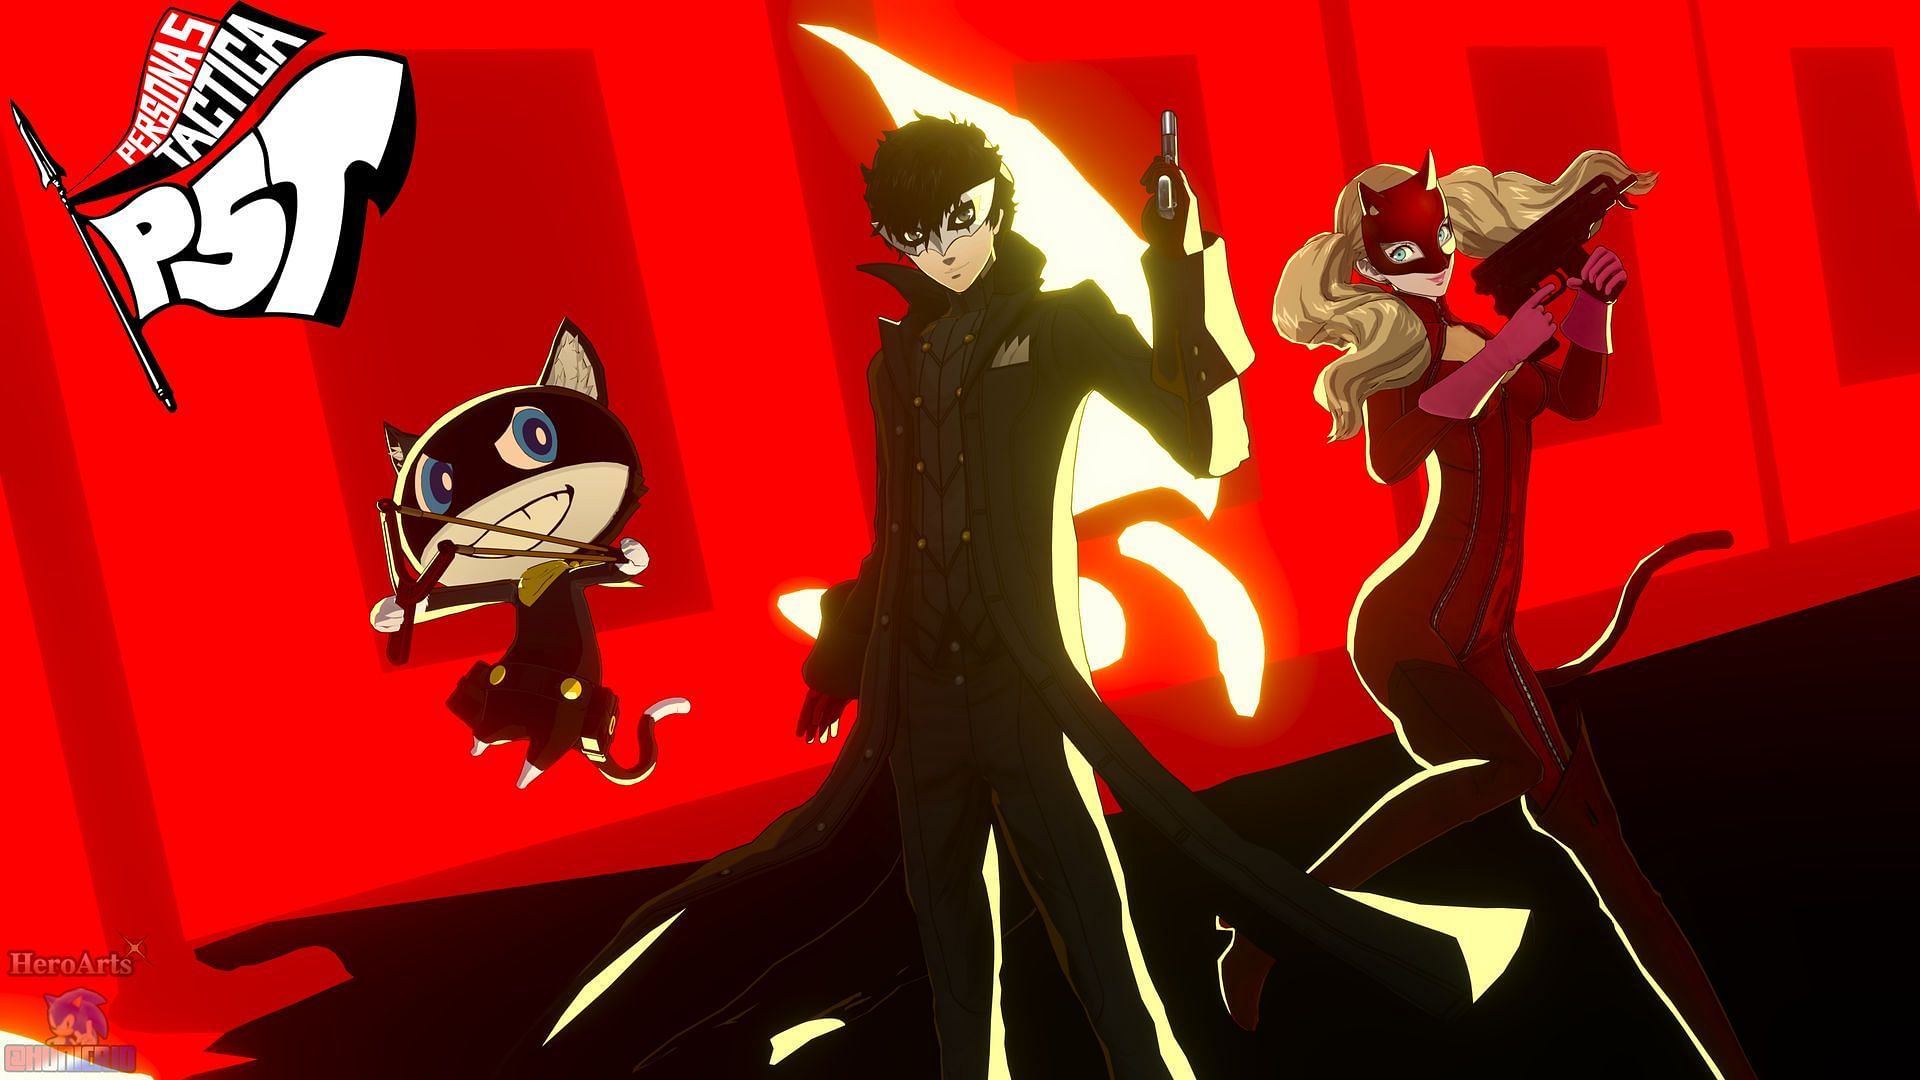 Persona 5 Tactica team composition is quite different than other P5 games (Image via Atlus)